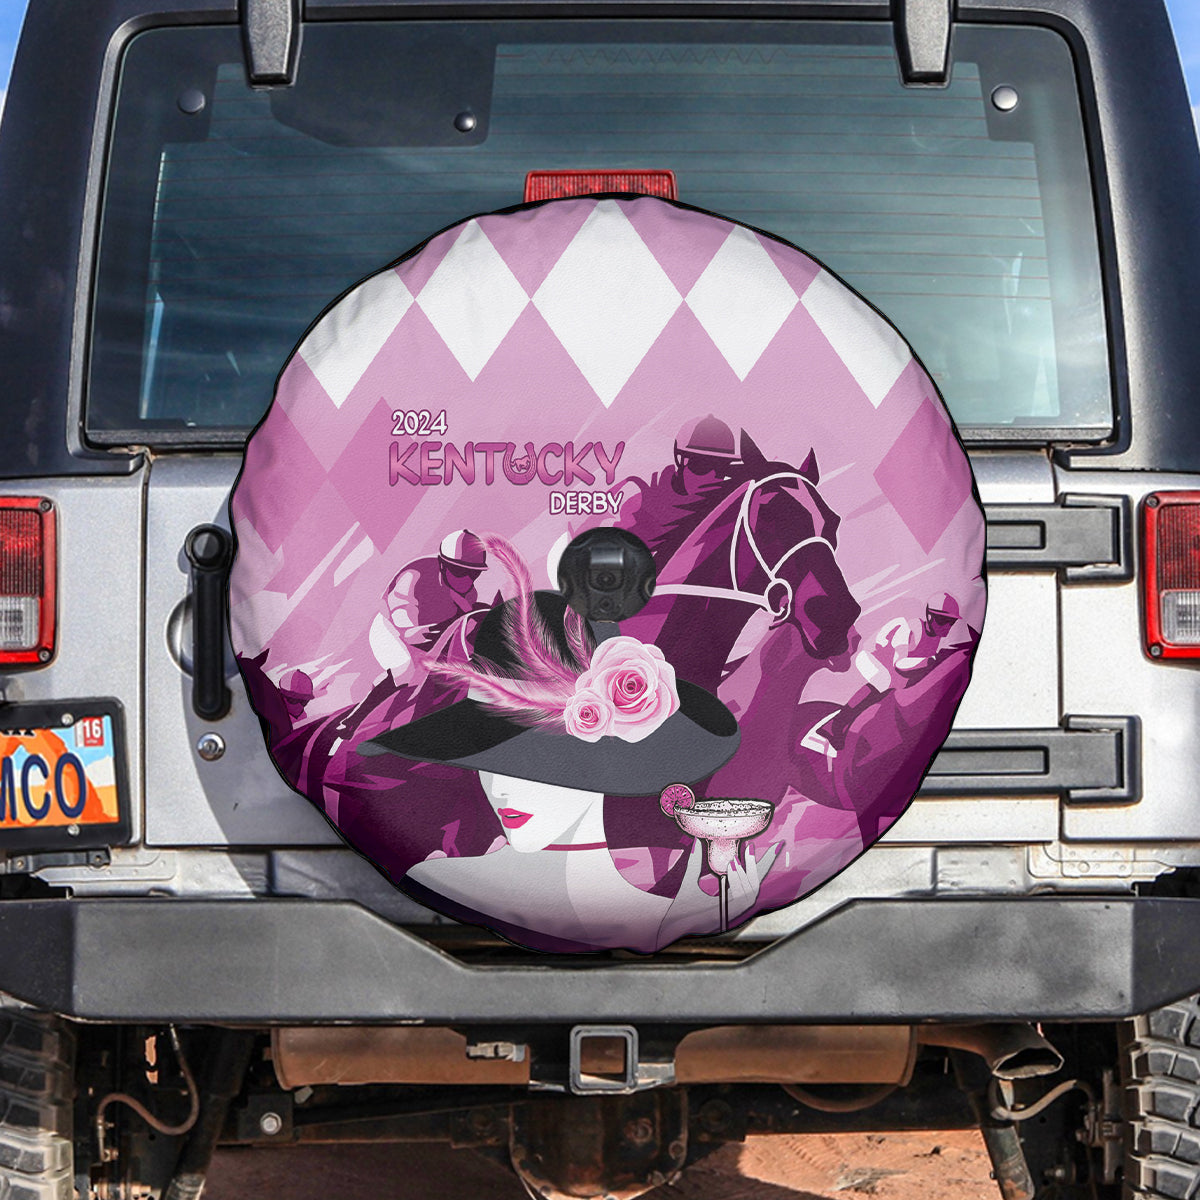 2024 Kentucky Horse Racing Spare Tire Cover Derby Mint Julep Girl - Pink Pastel